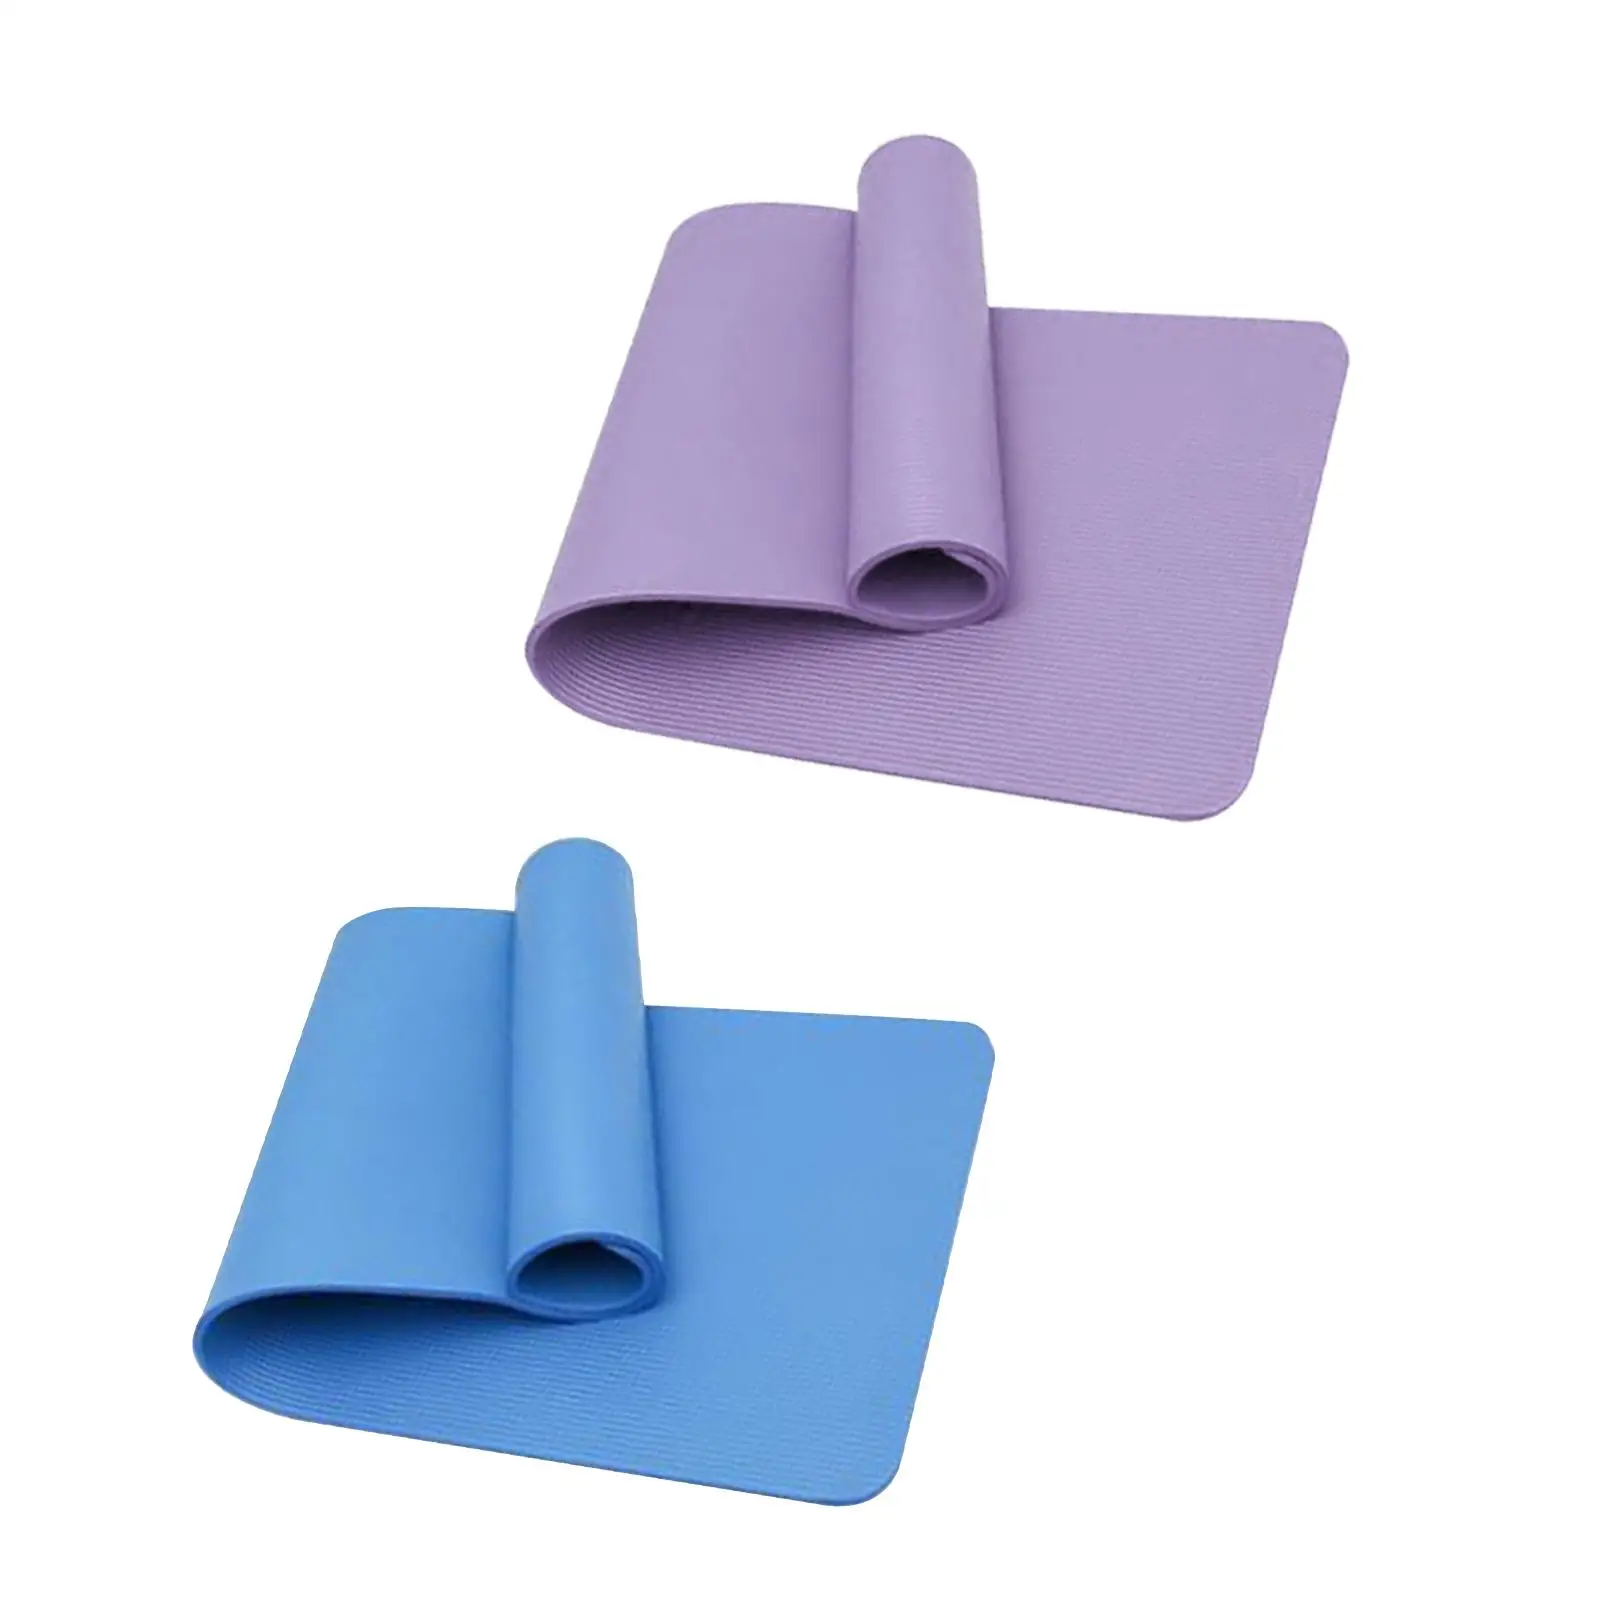 Yoga mats sports fitness mats cushion knee pads women for exercise floor